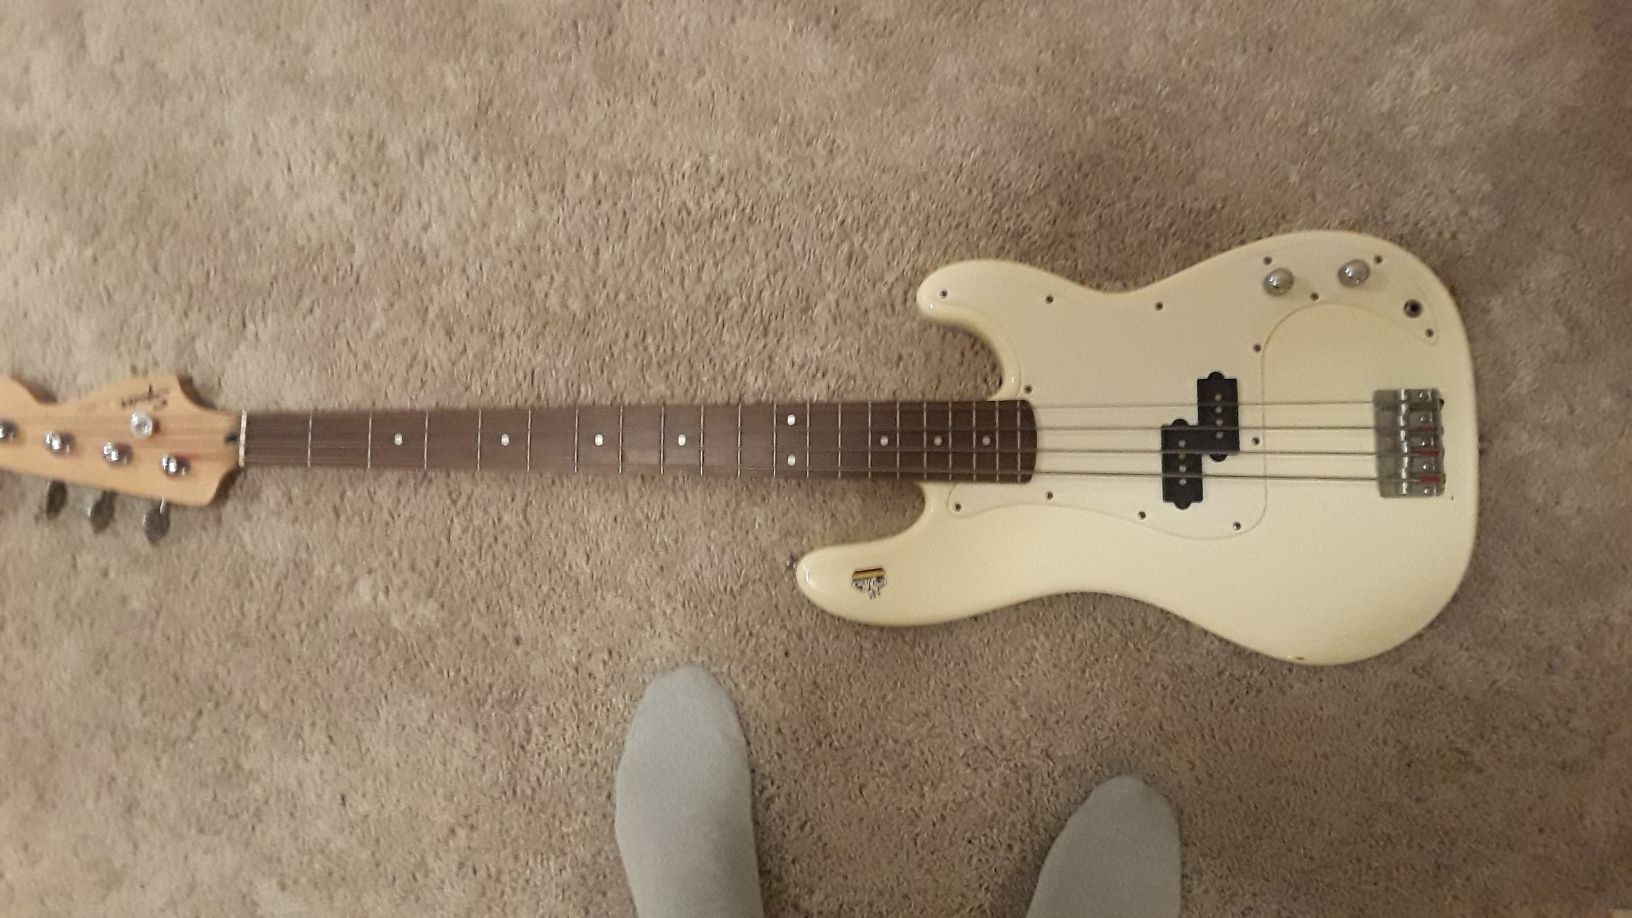 Affinity squiter p-bass guitar